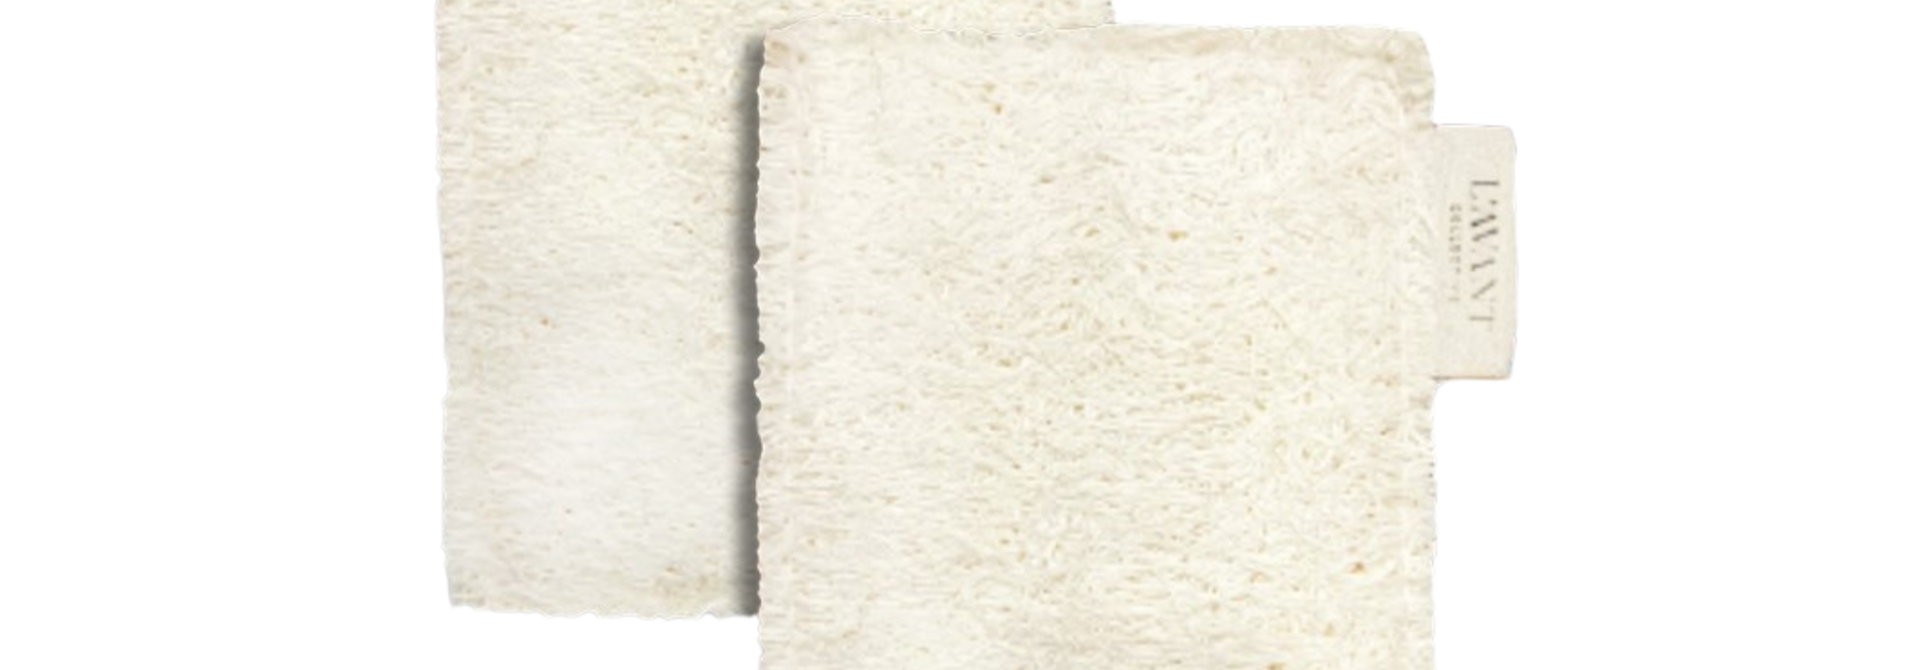 Eco-Friendly Sponges | The Home Care Collection, Natural - 2 Pack